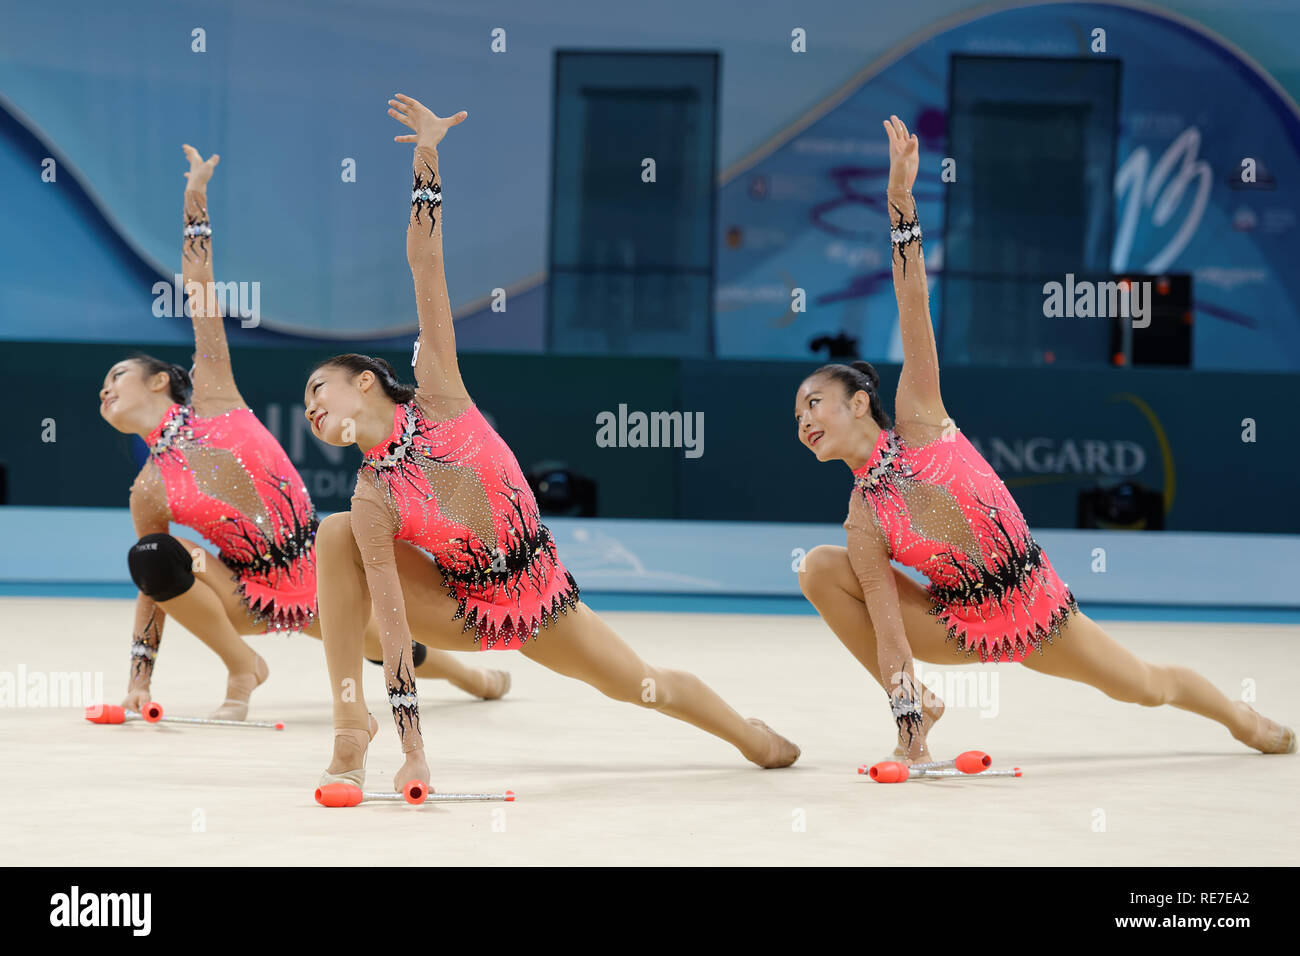 Kiev, Ukraine - August 31, 2013: Team Korea performs with clubs during 32nd Rhythmic Gymnastics World Championships. The event is held in the Palace o Stock Photo